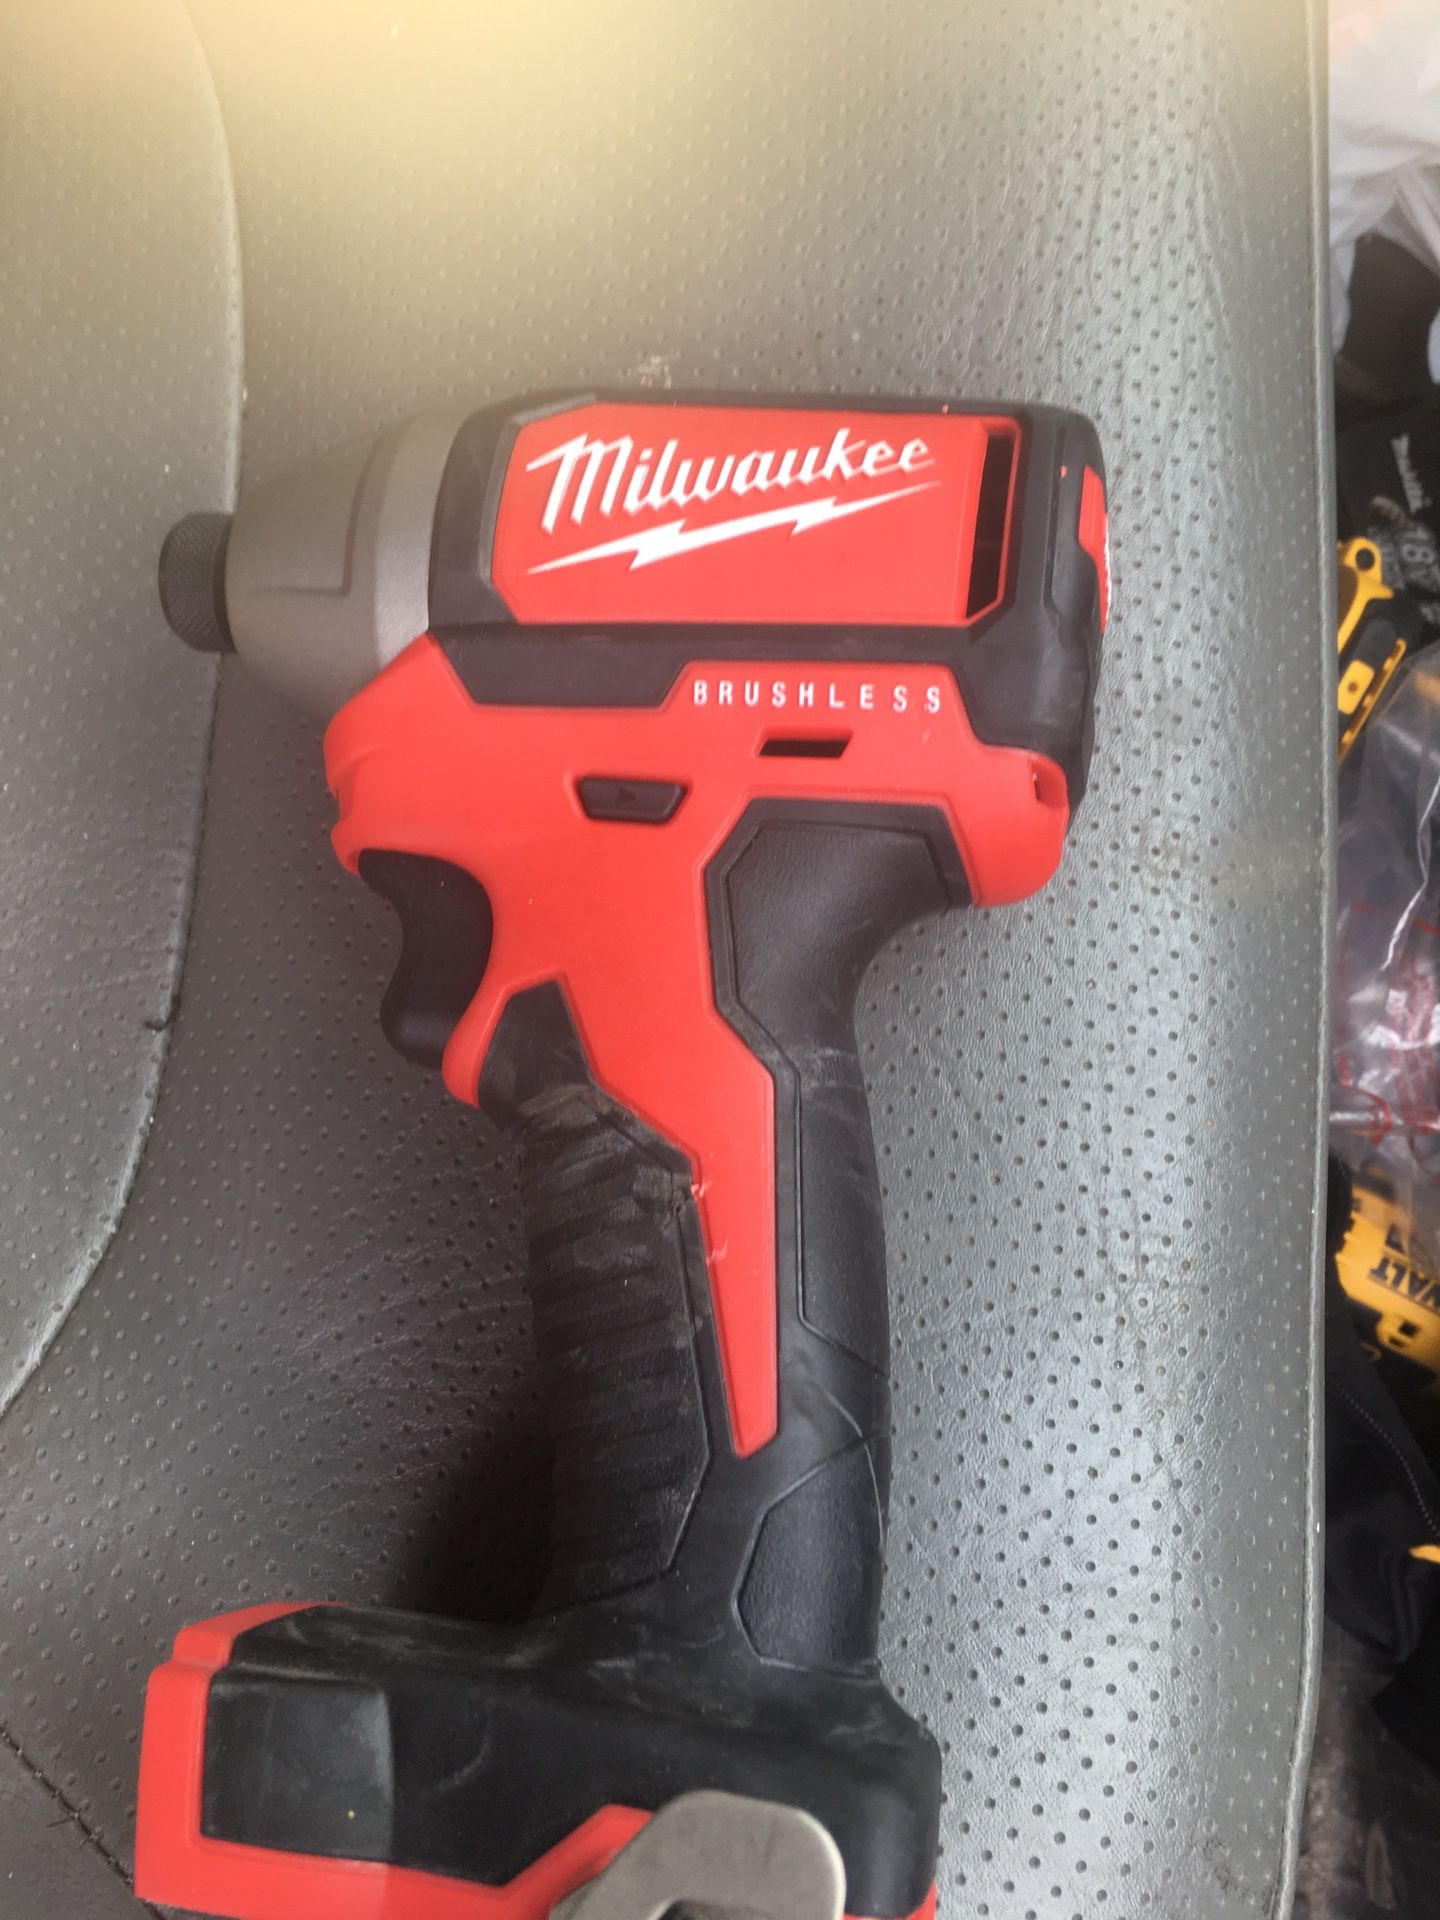 Milwaukee impact drill with charger Brushless